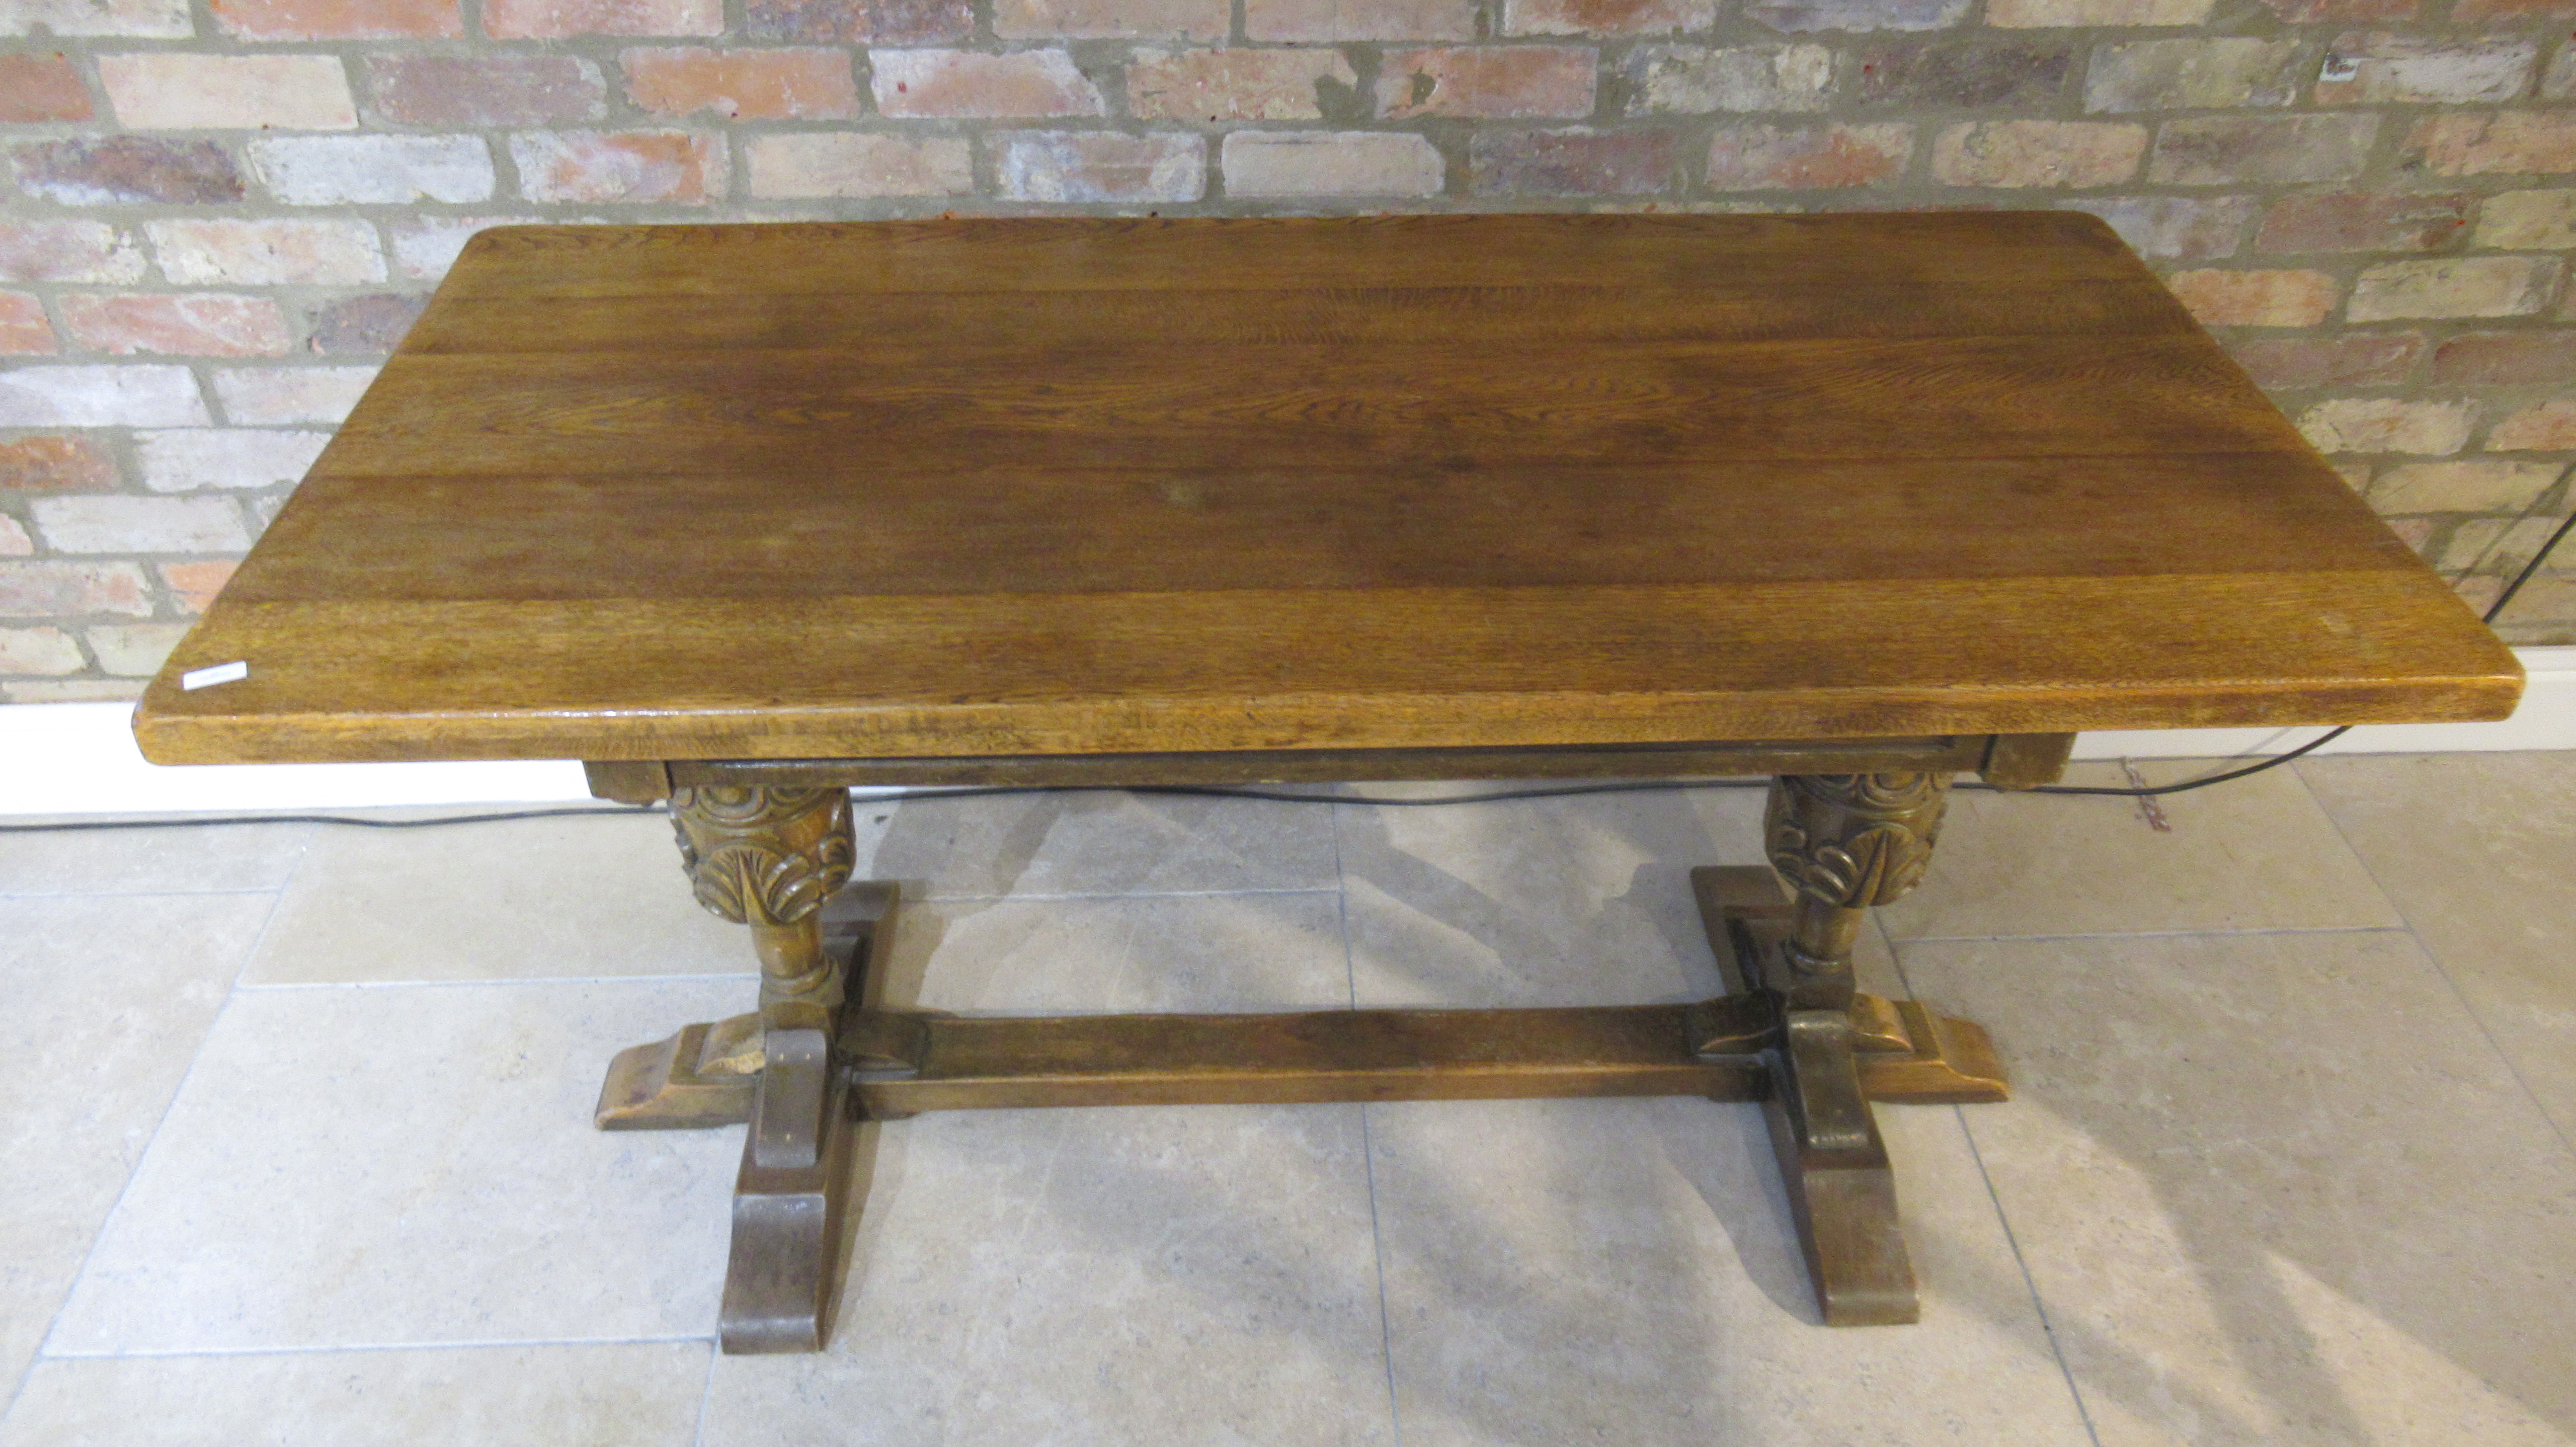 A 1940's oak dining table - 152cm x 75cm - in good condition - Image 2 of 2